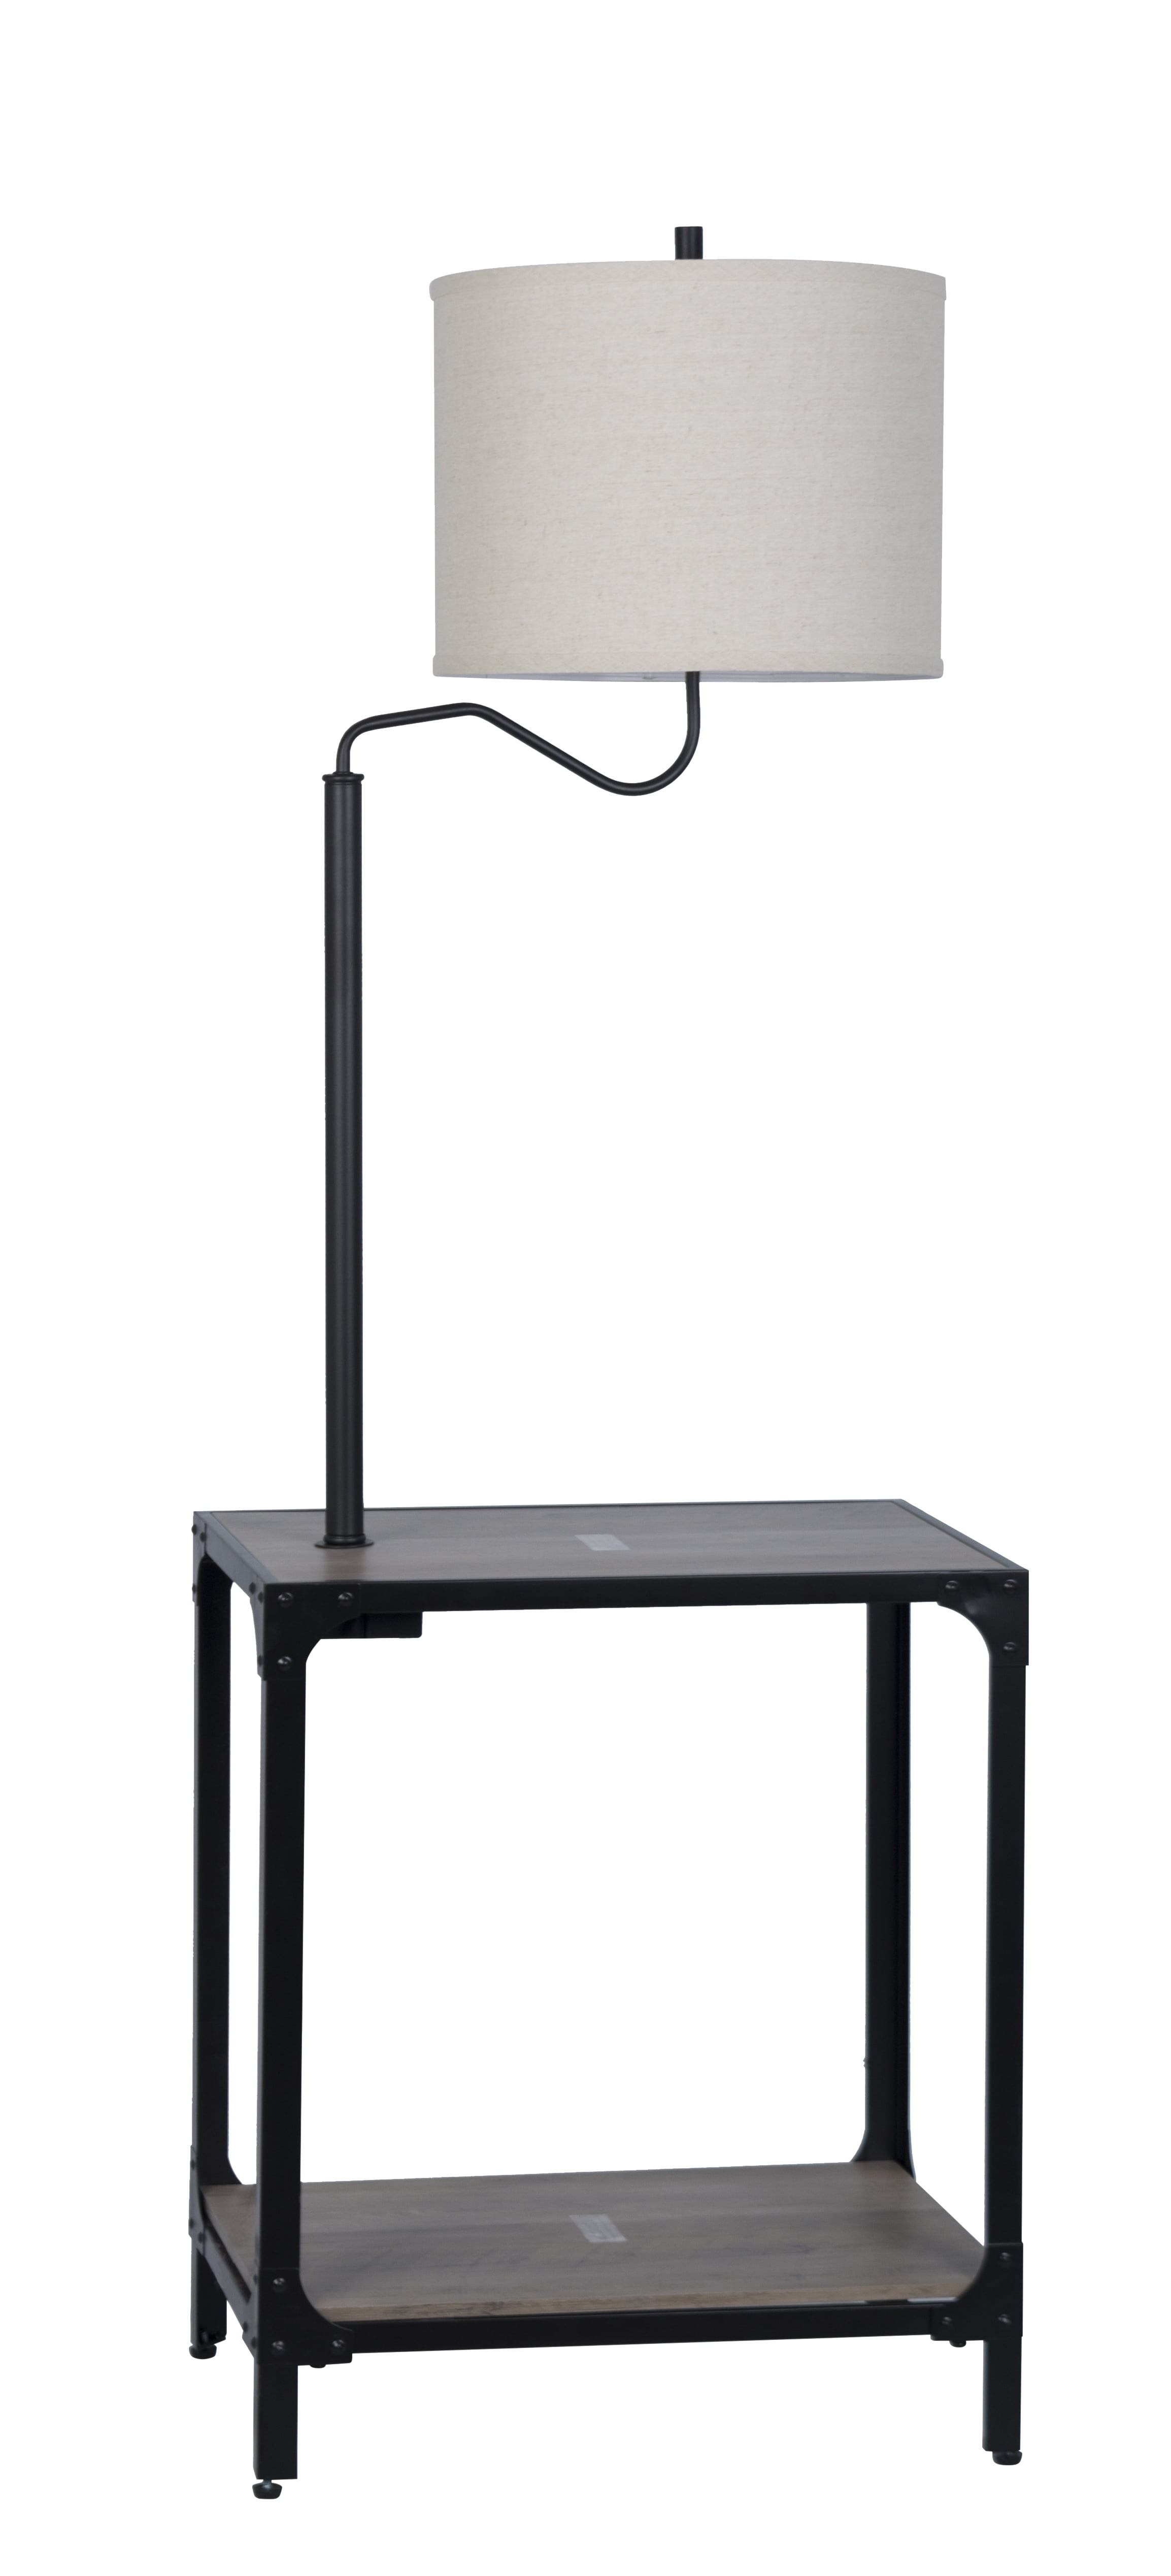 End Table Floor Lamp With Usb Port, Hometrends End Table Floor Lamp With Usb Port